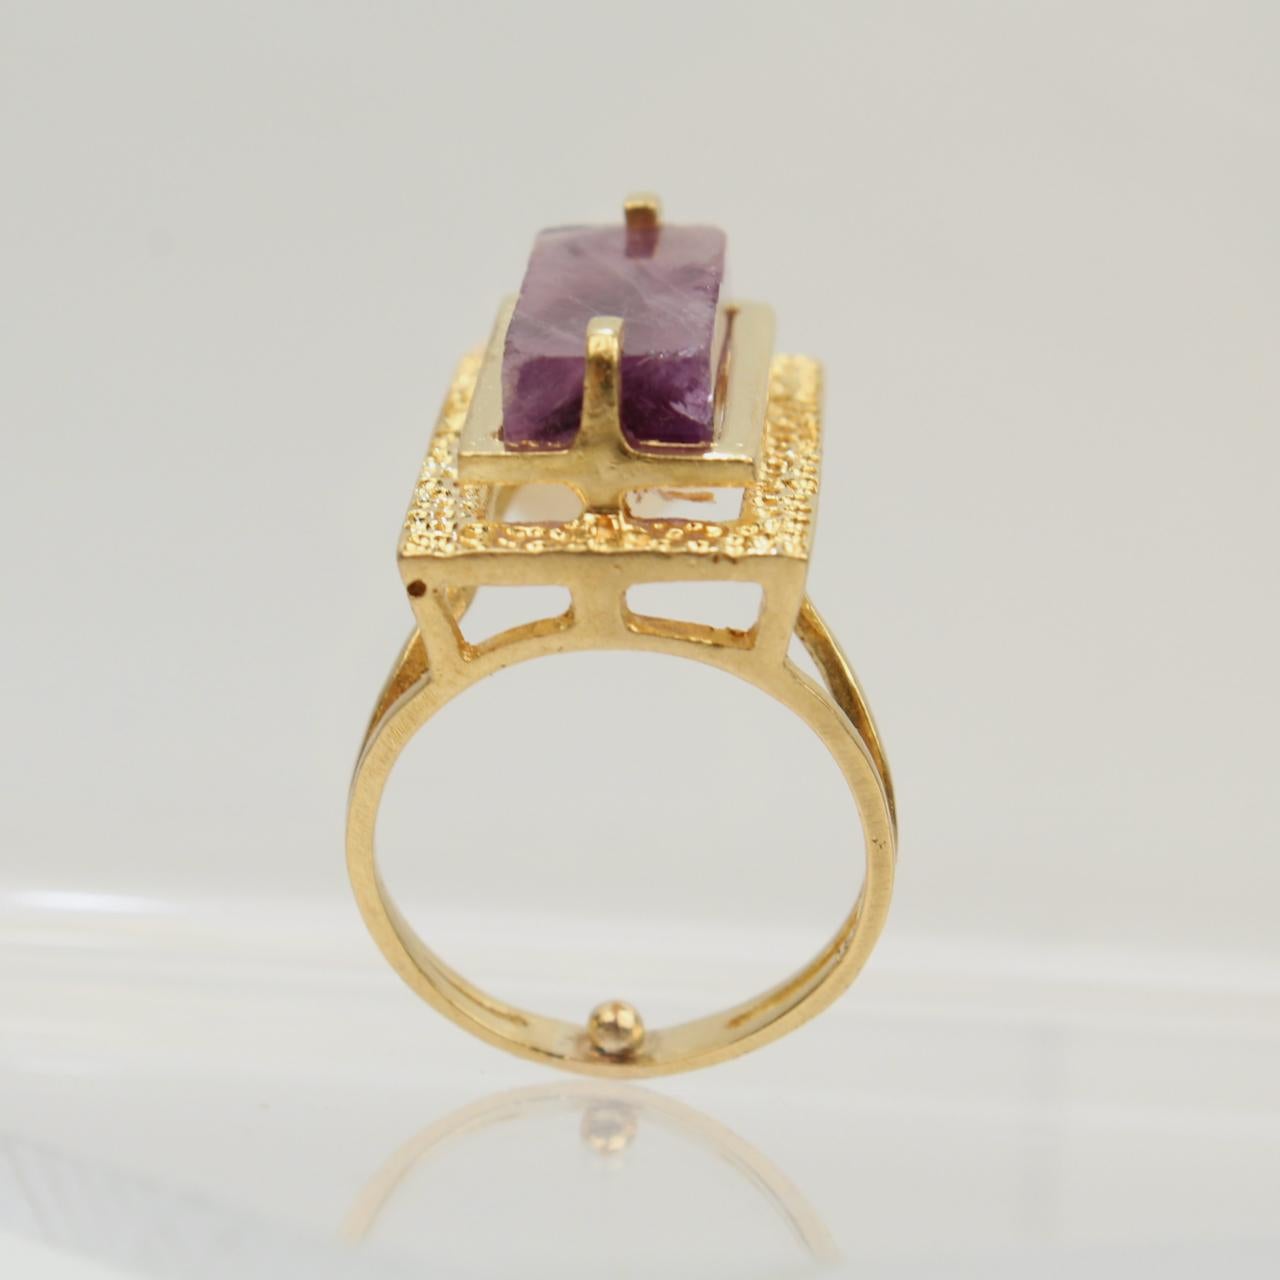 Modernist Asymmetrical 18k Gold and Rough Cut Amethyst Gemstone Cocktail Ring For Sale 5